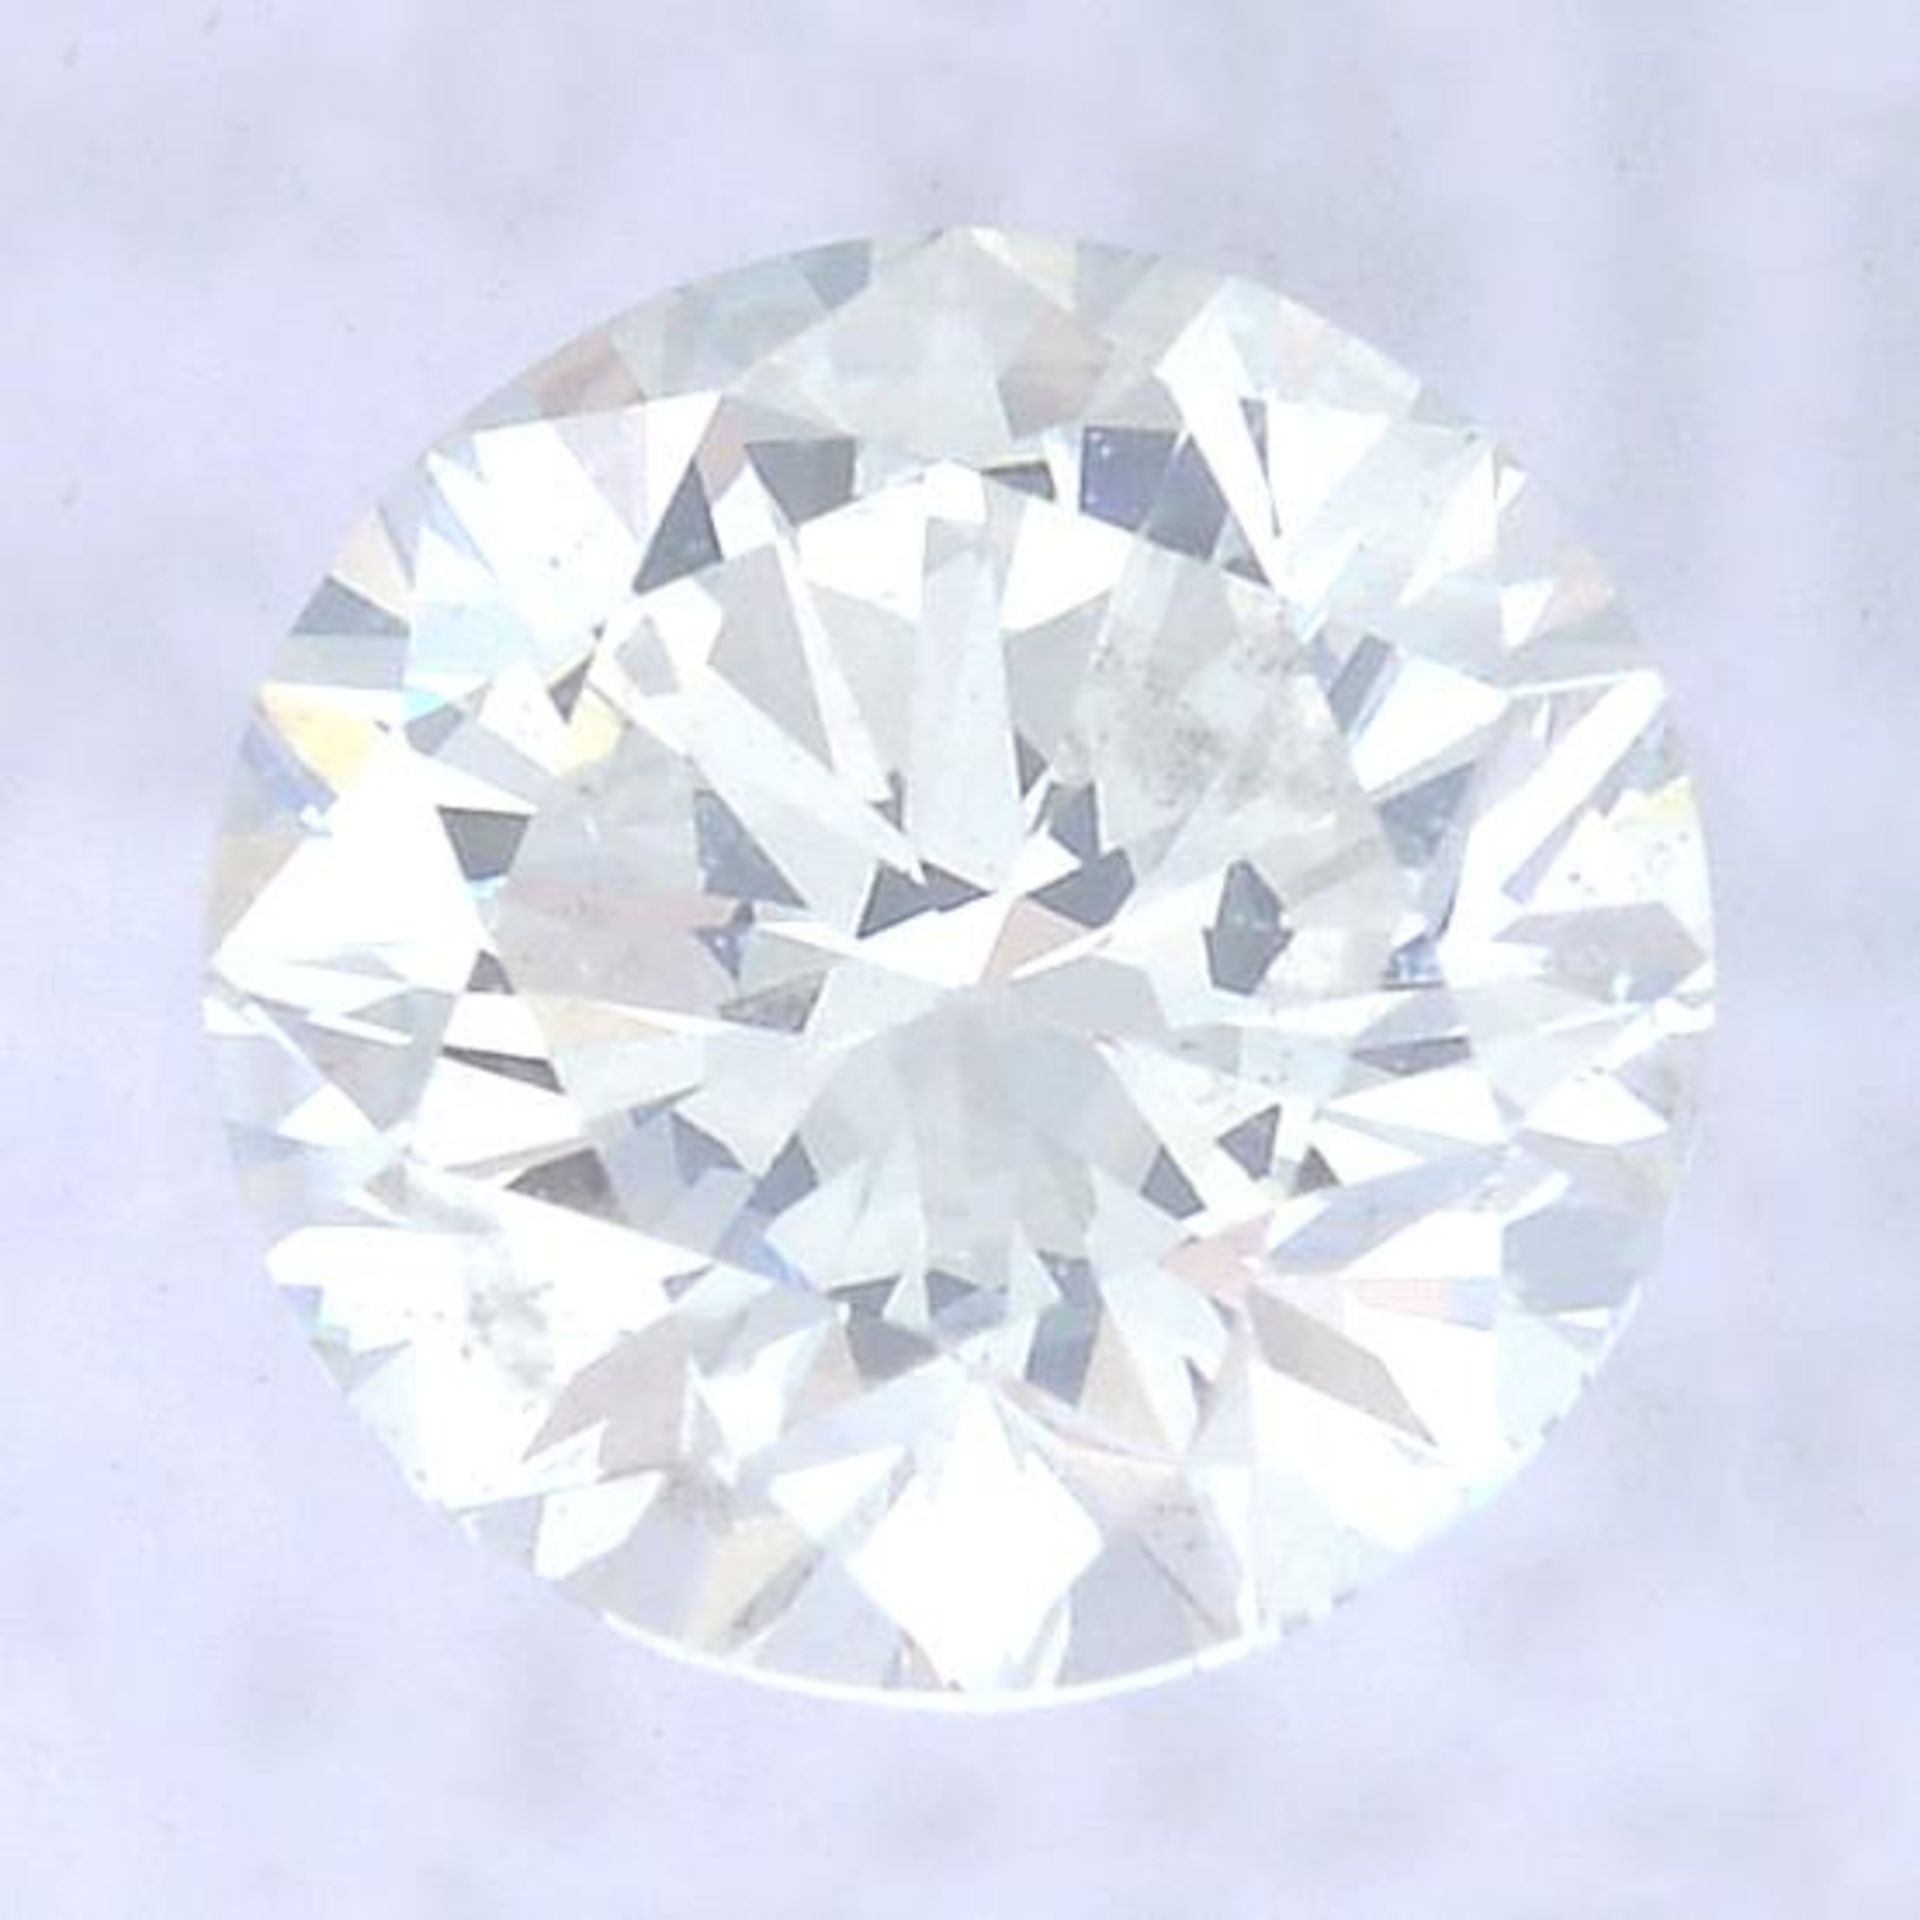 A brilliant cut diamond, weighing 0.60ct, measuring 5.26 by 5.3 by 3.37mms.